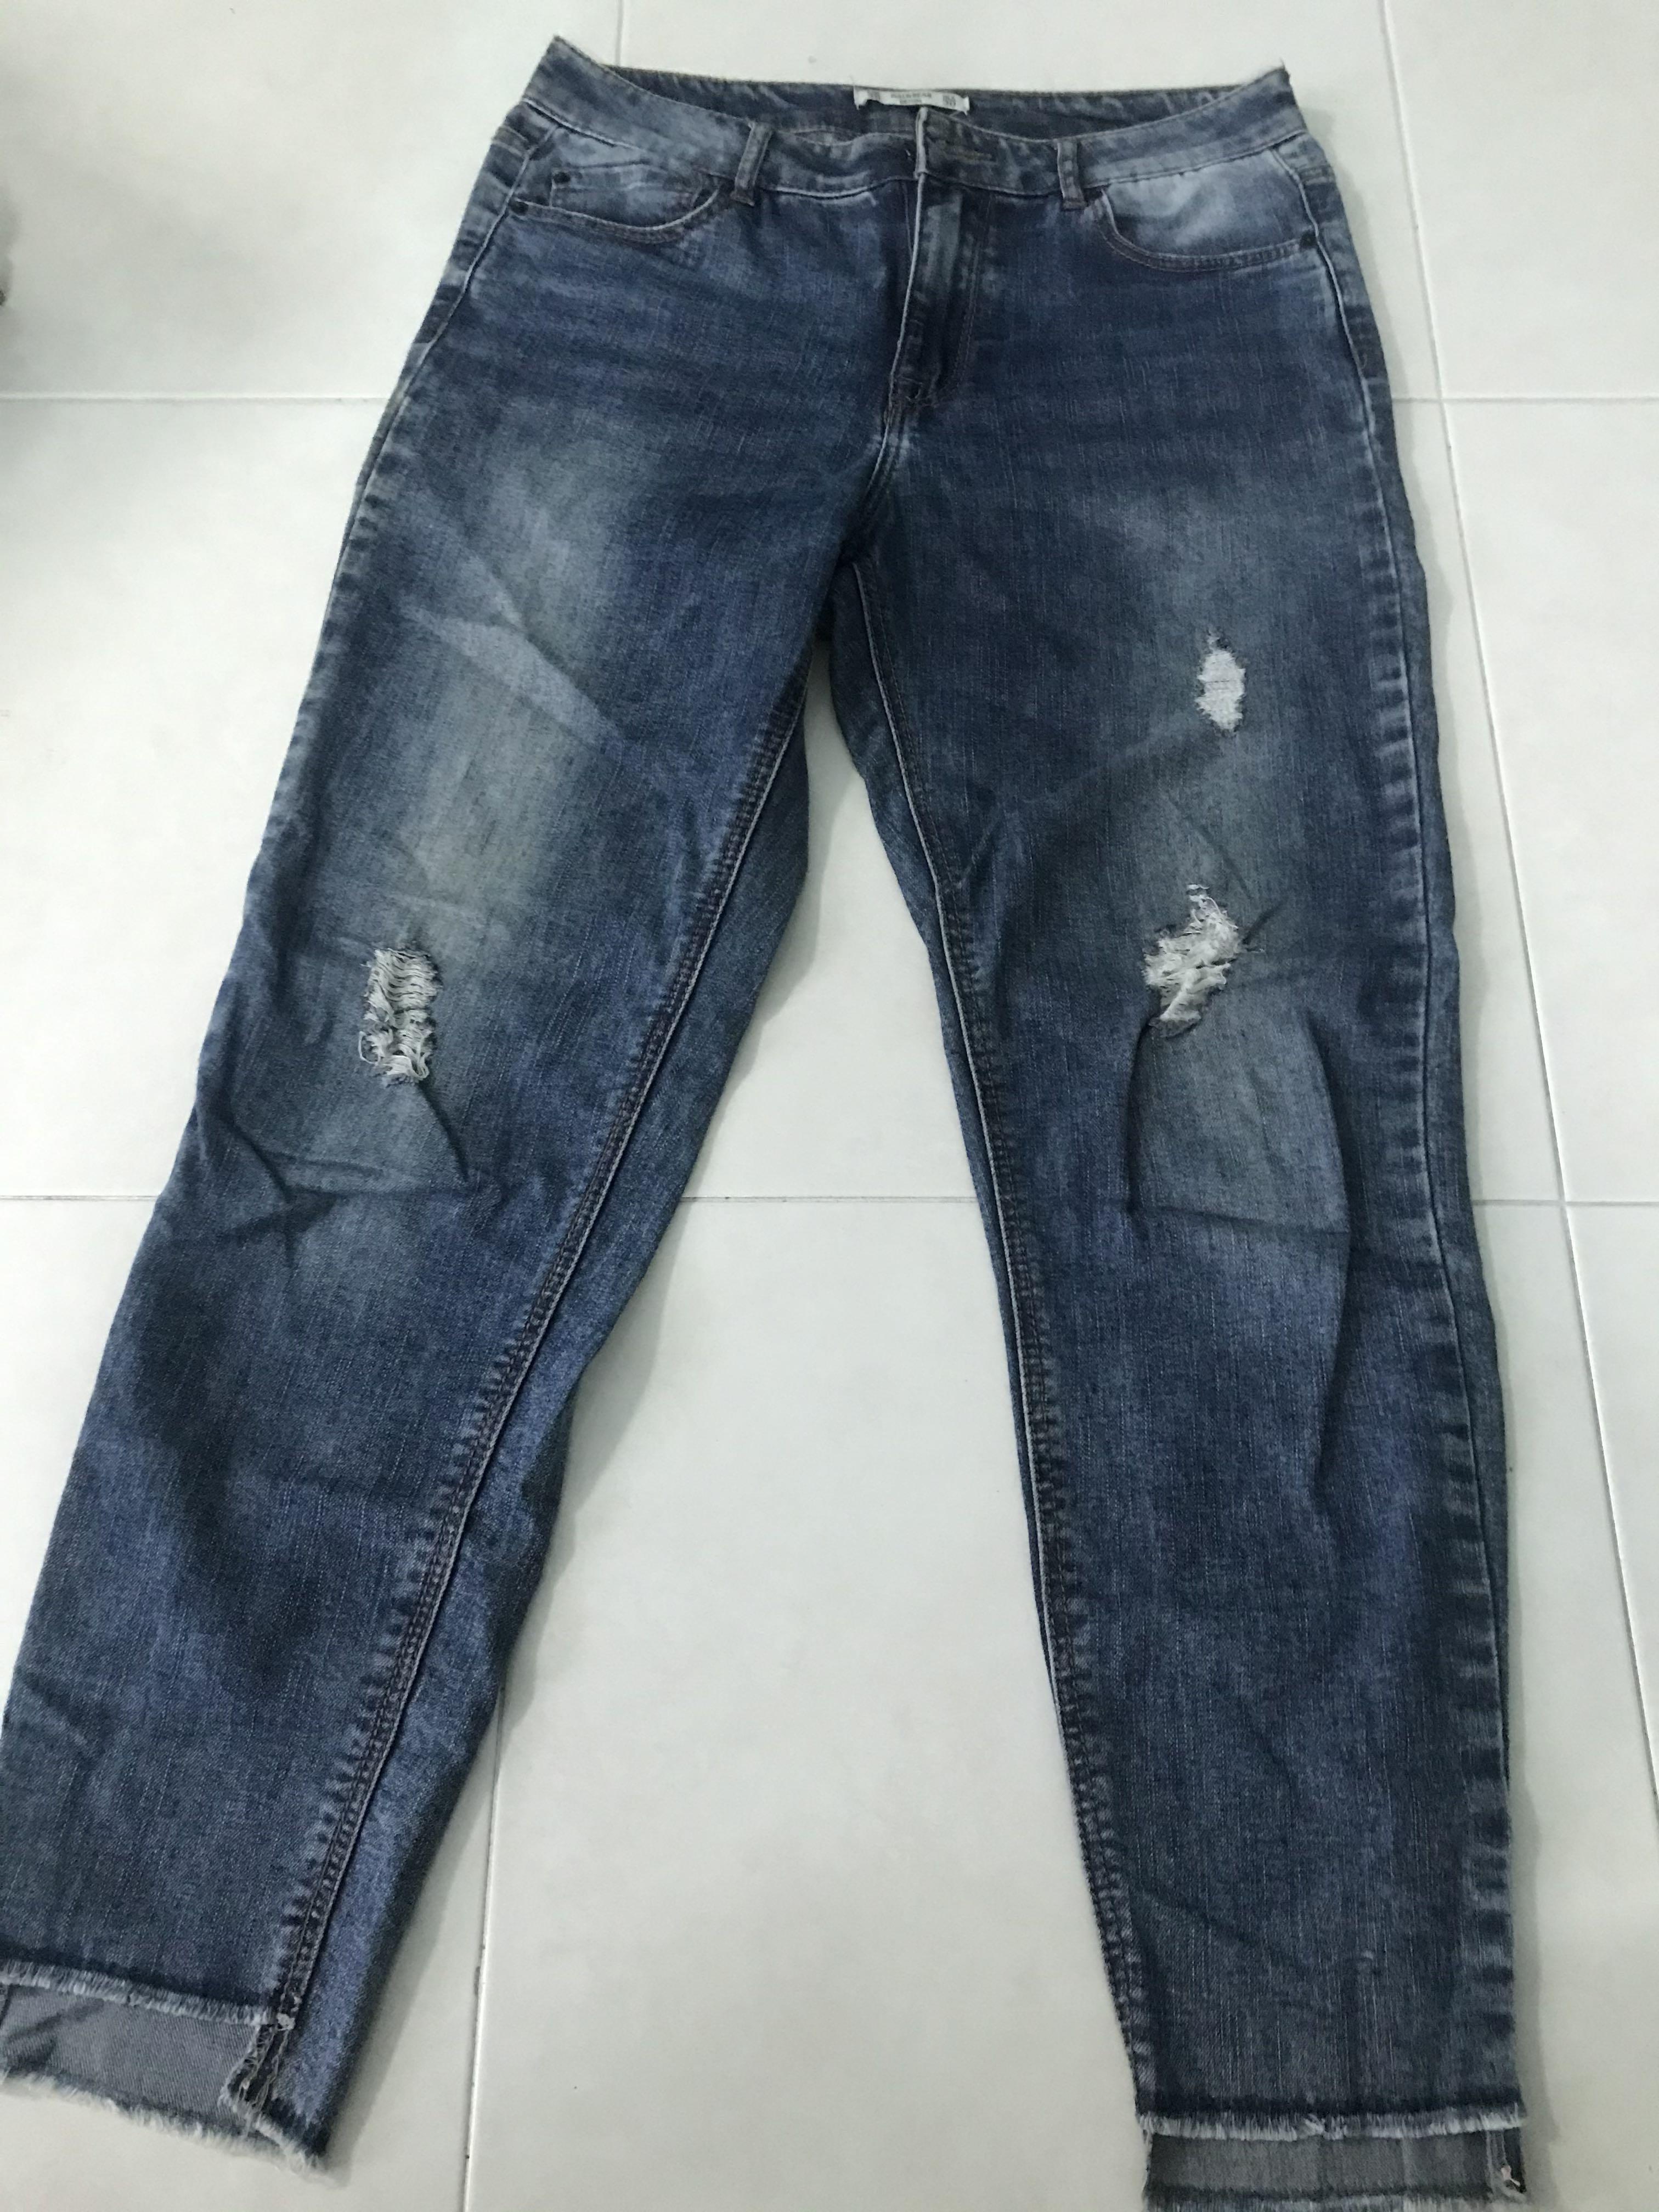 moving button on jeans